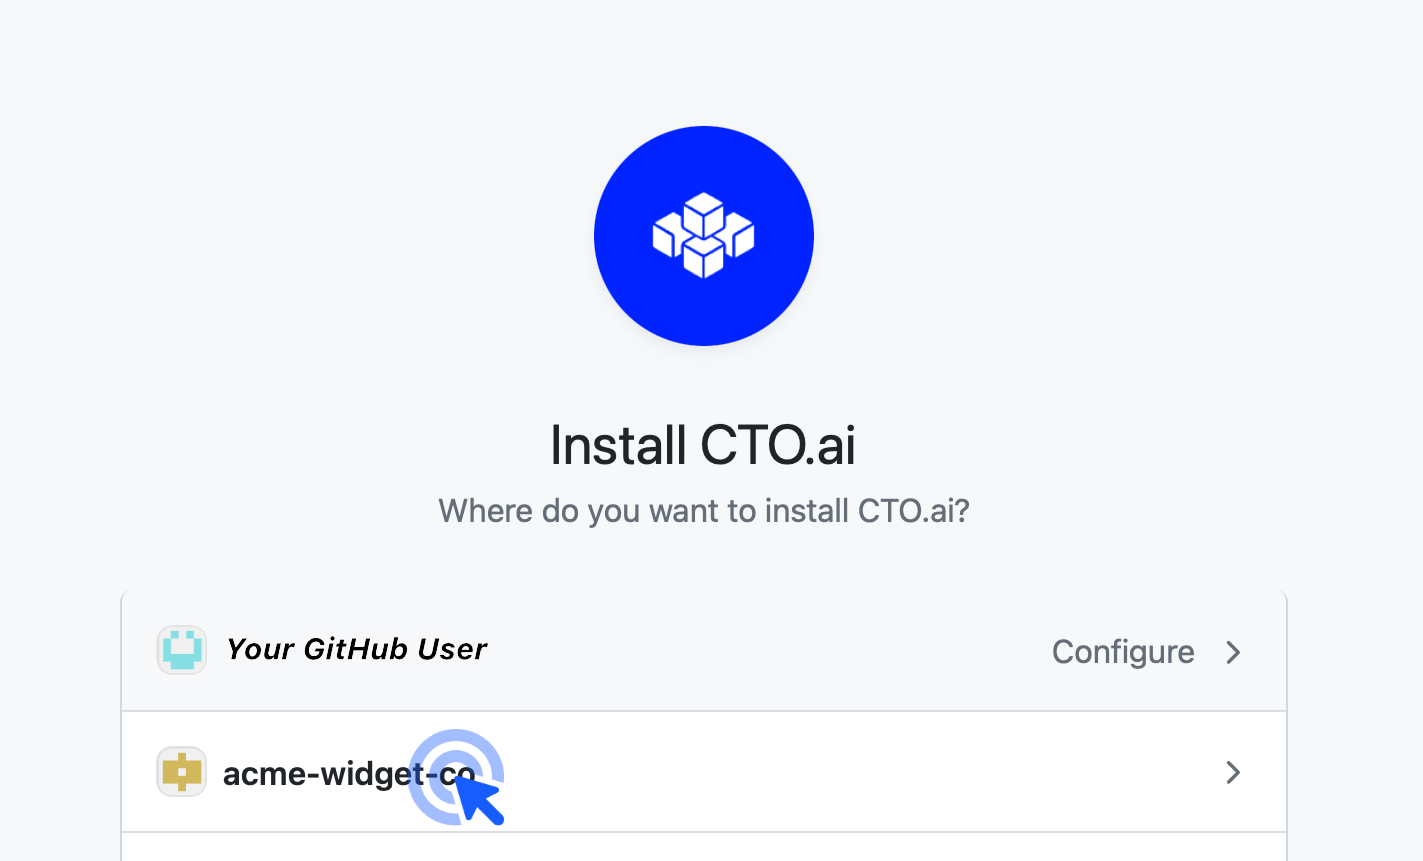 Click on your own username or the name of the GitHub organization where you wish to install our app.